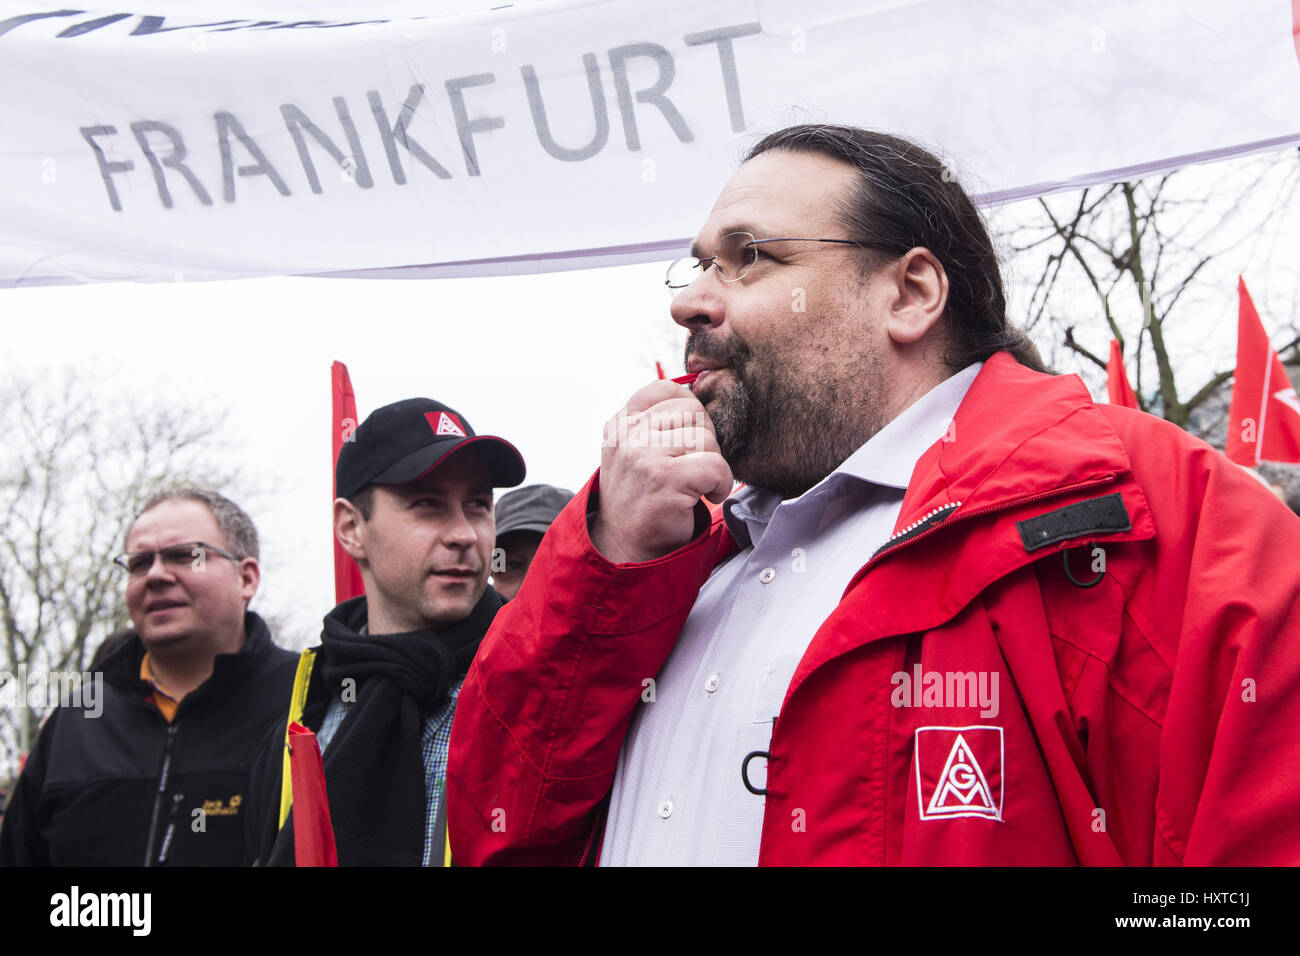 Berlin, Berlin, Germany. 30th Mar, 2017. On the day of the Supervisory Board meeting of Bombardier, 1000 employees from the German sites demonstrate after a call of the trade union IG Metall in front of the company headquarters in Berlin. At Bombardier, a Canadian aircraft and railway group, a total of 5000 jobs will be dropped by the end of 2018. [German: Am Tag der Aufsichtsratsitzung von Bombardier streiken 1000 BeschÃ¤ftigte aus den deutschen Standorten nach Aufruf der Gewerkschaft IG Metall vor der Firmenzentrale in Berlin. Credit: ZUMA Press, Inc./Alamy Live News Stock Photo